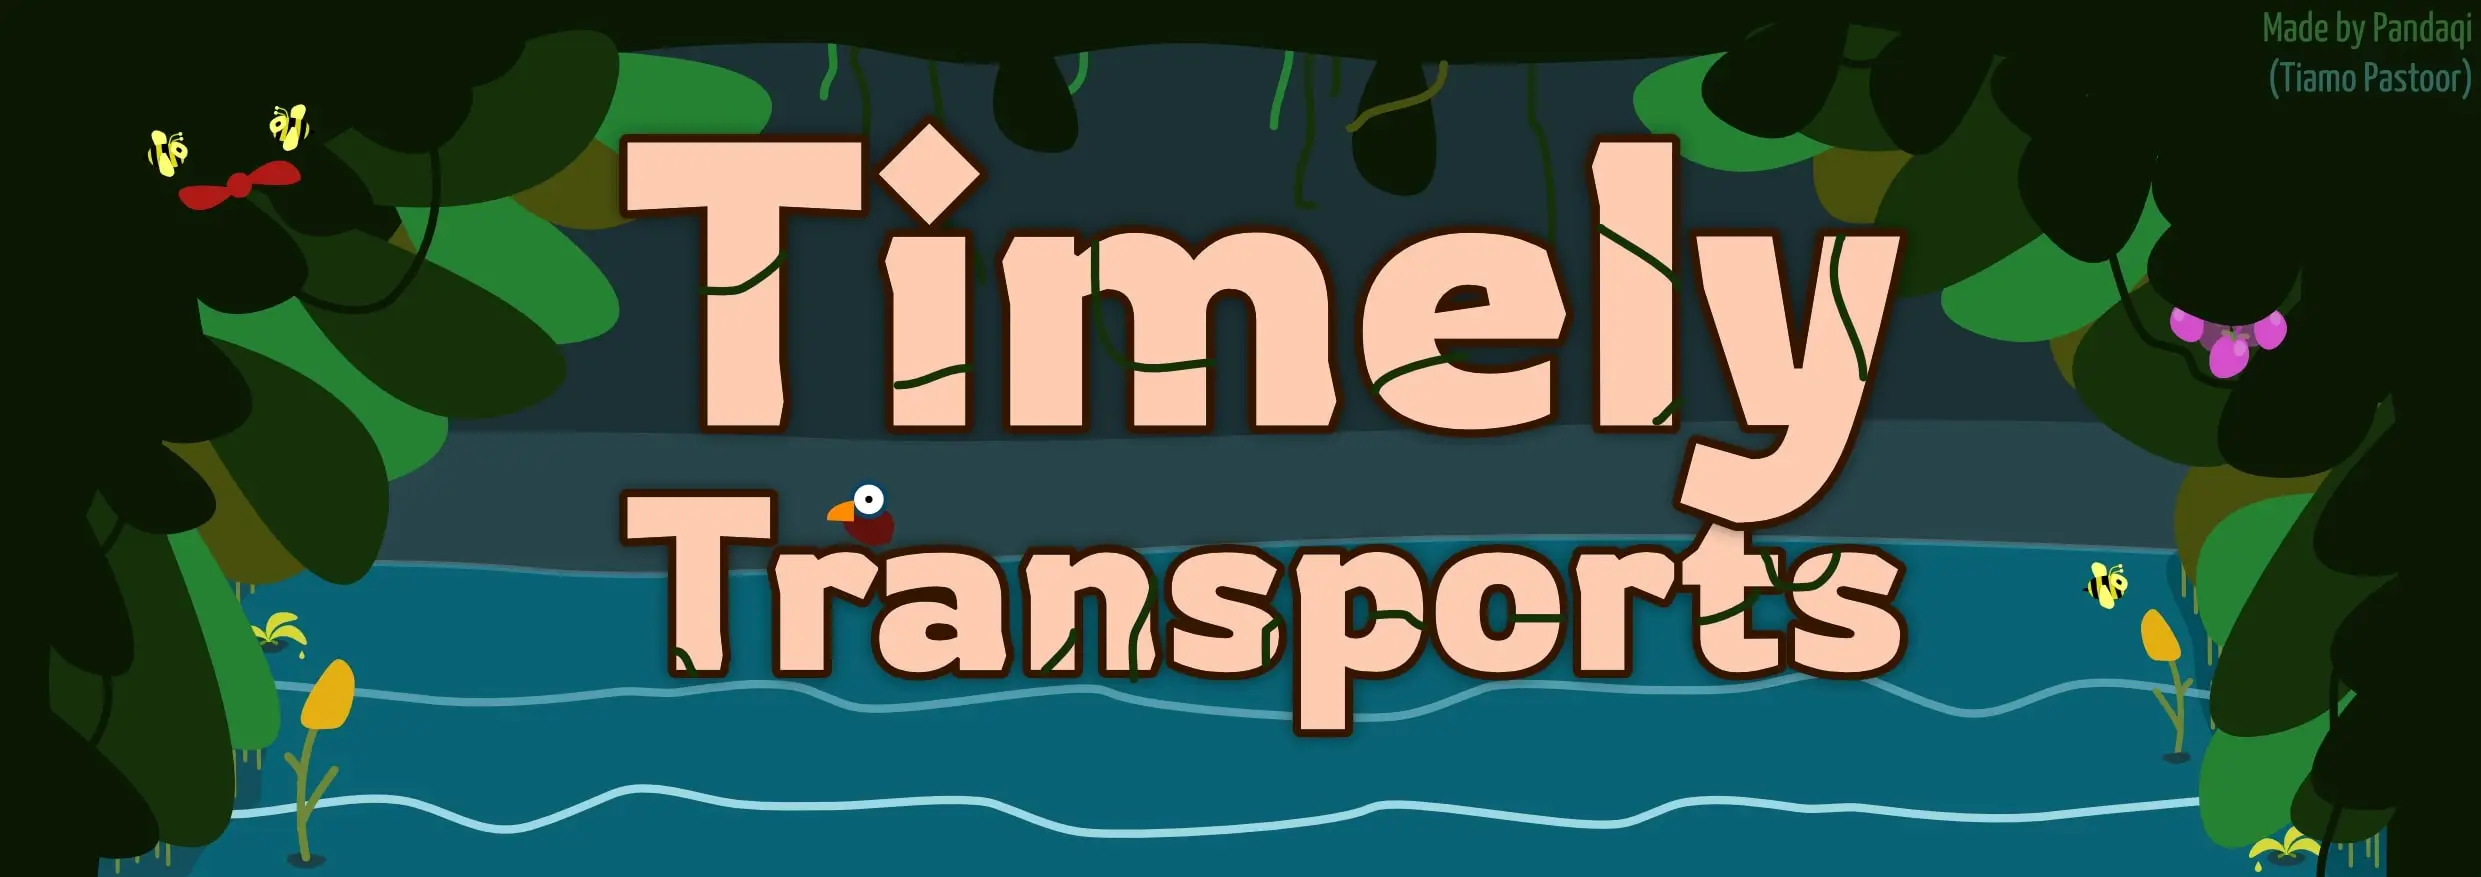 Thumbnail / Header for article: Timely Transports (Part 4)